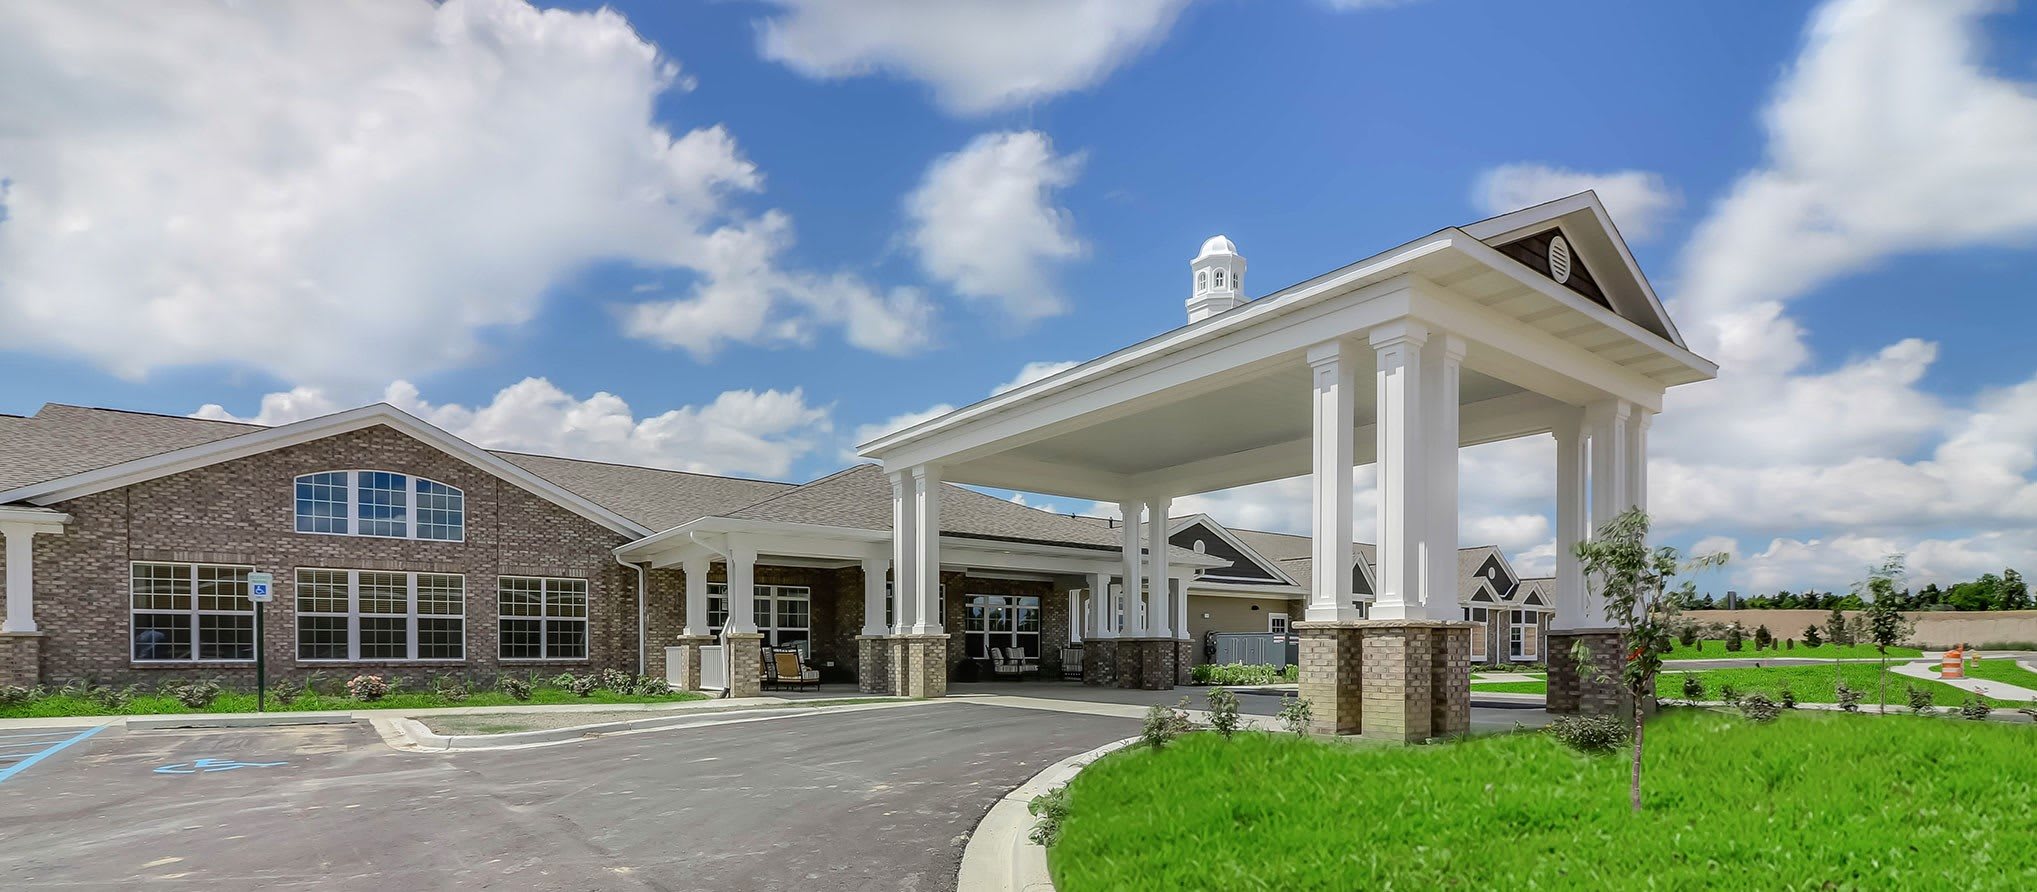 Springvale Assisted Living and Memory Care community exterior